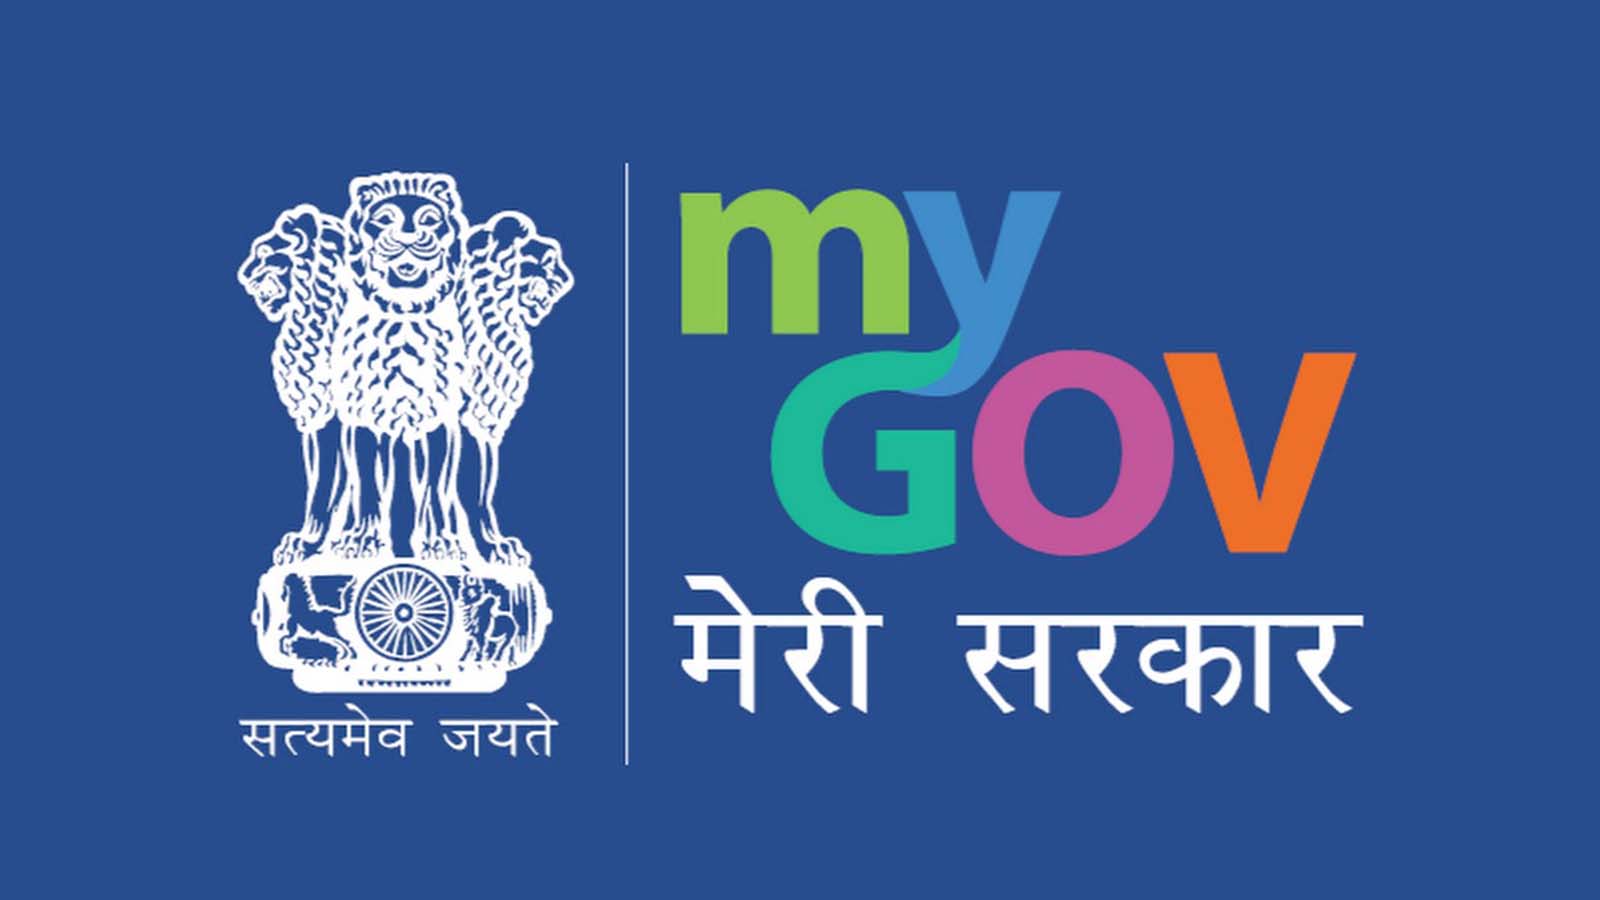 How Government Of India Used Conversational AI During COVID 19: A Case Study